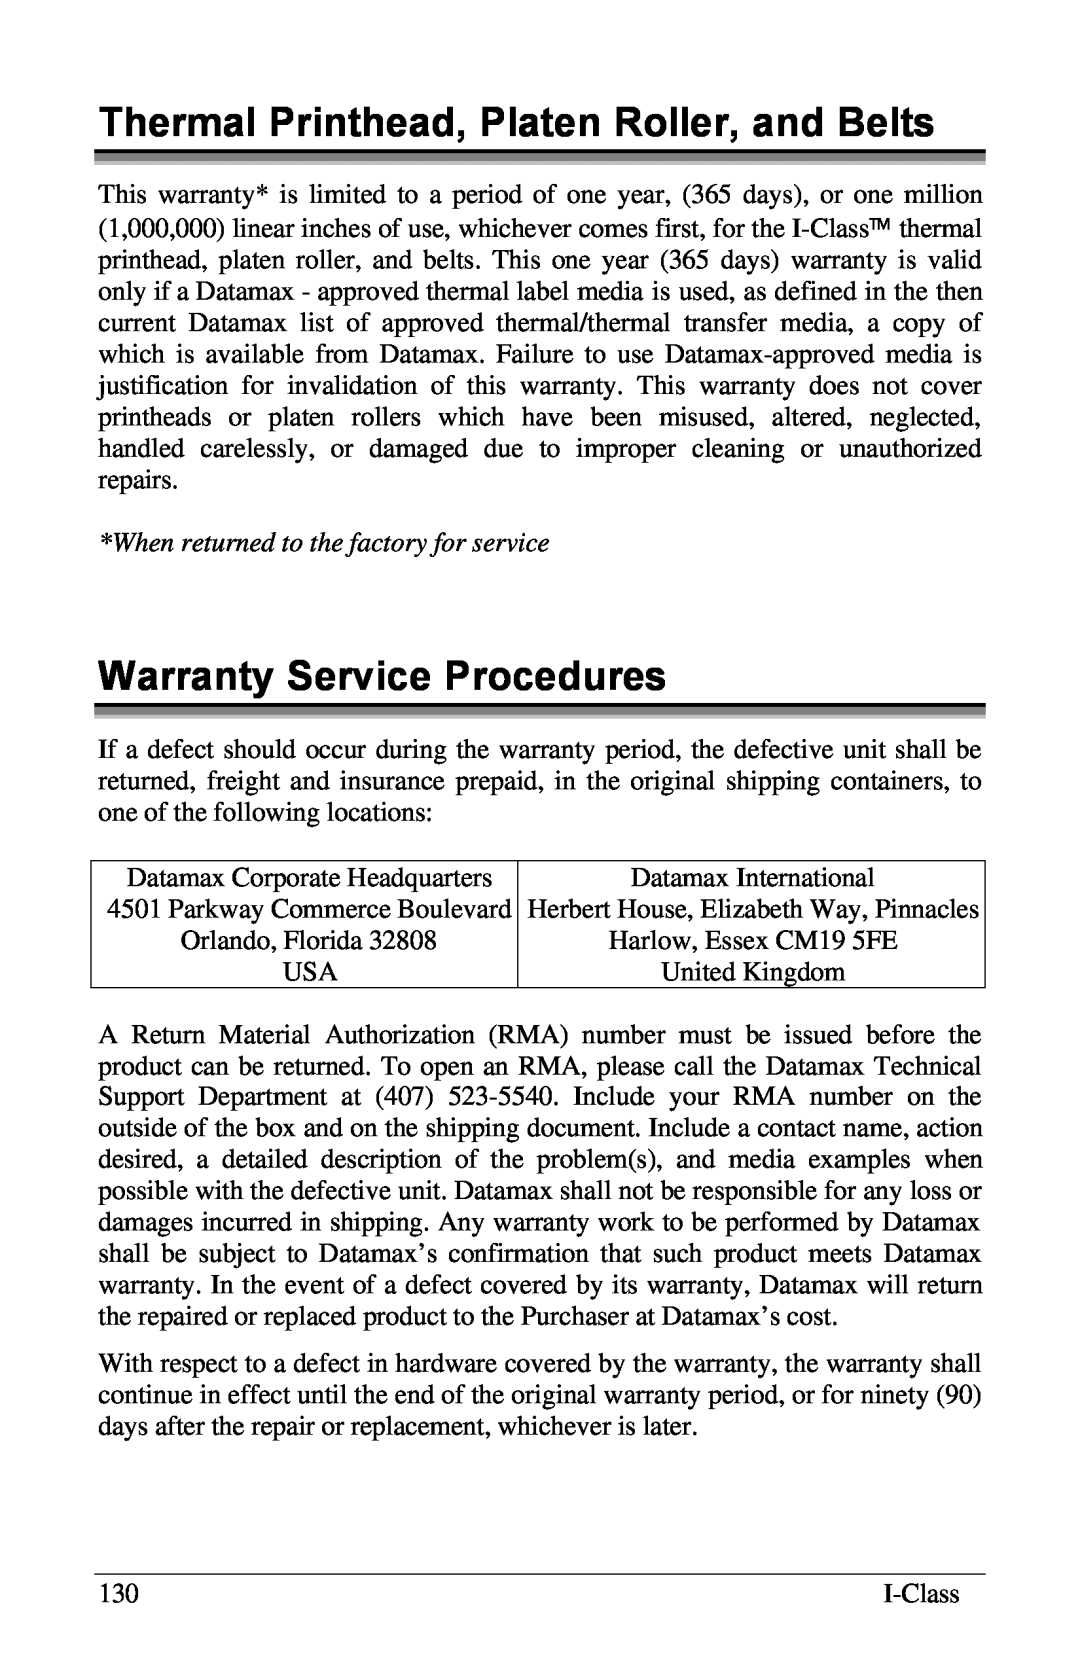 Xerox I Class manual Thermal Printhead, Platen Roller, and Belts, Warranty Service Procedures 